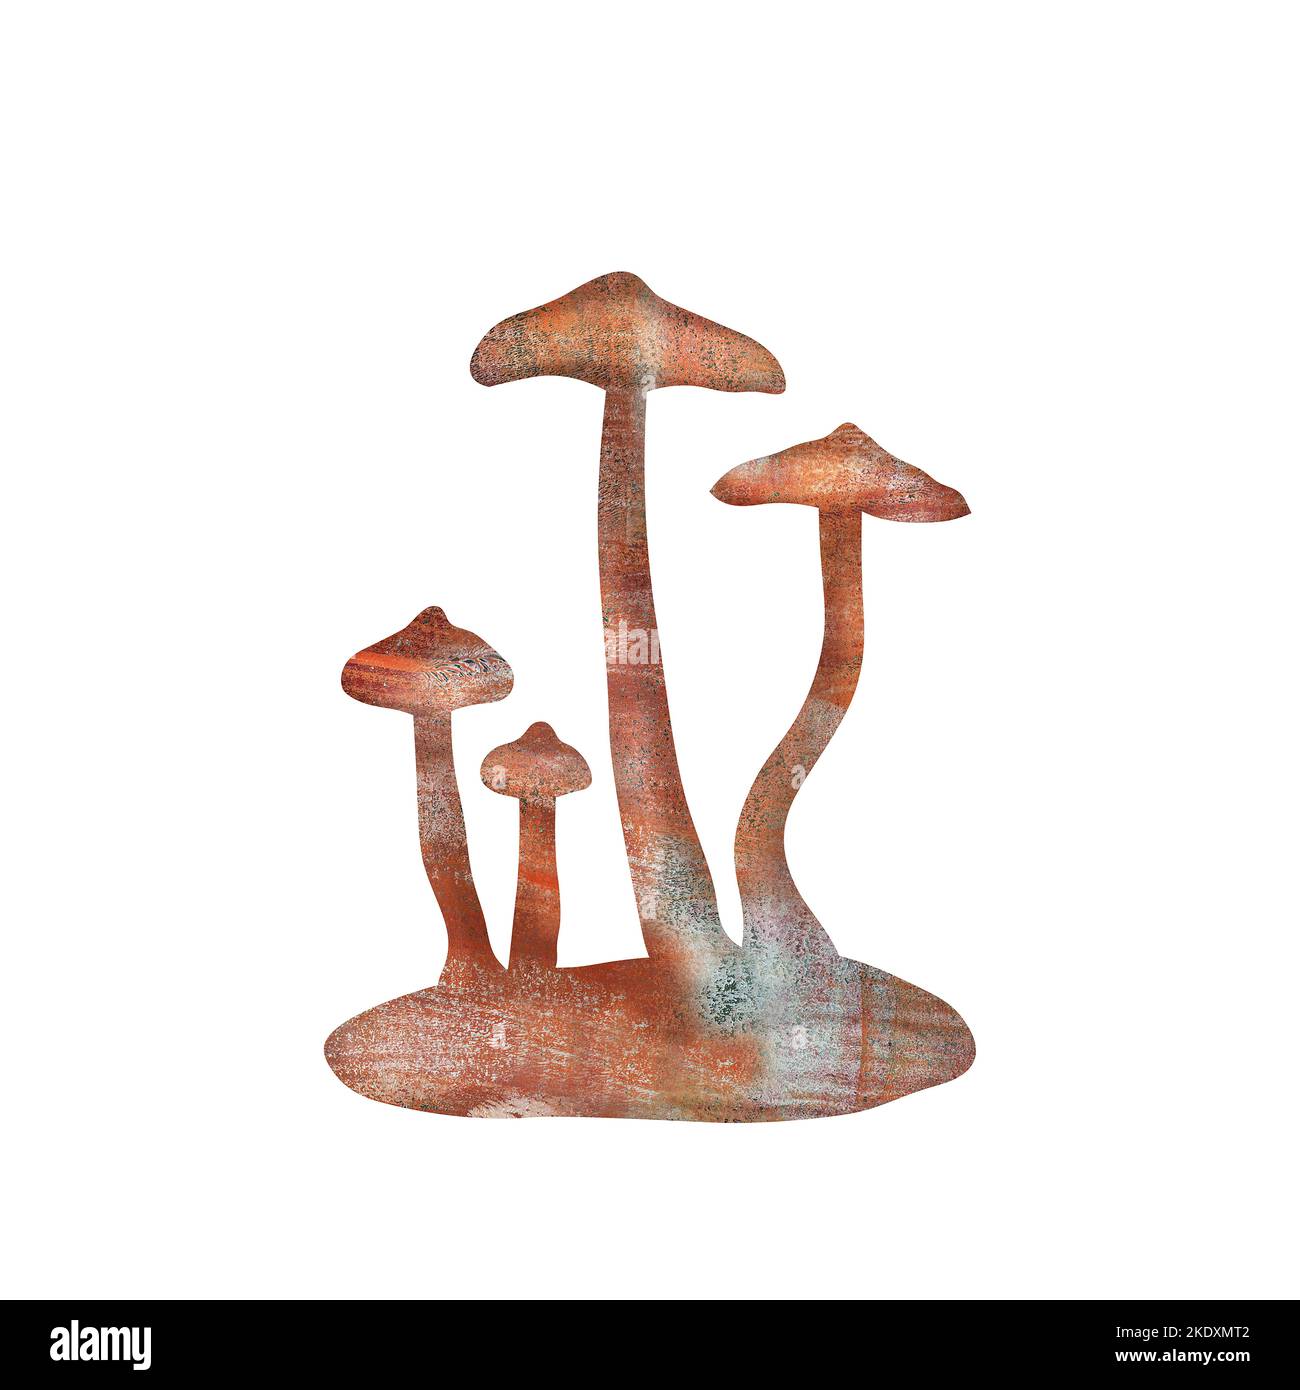 Illustration of Deadly webcap, a poisonous Cortinarius mushroom Stock Photo